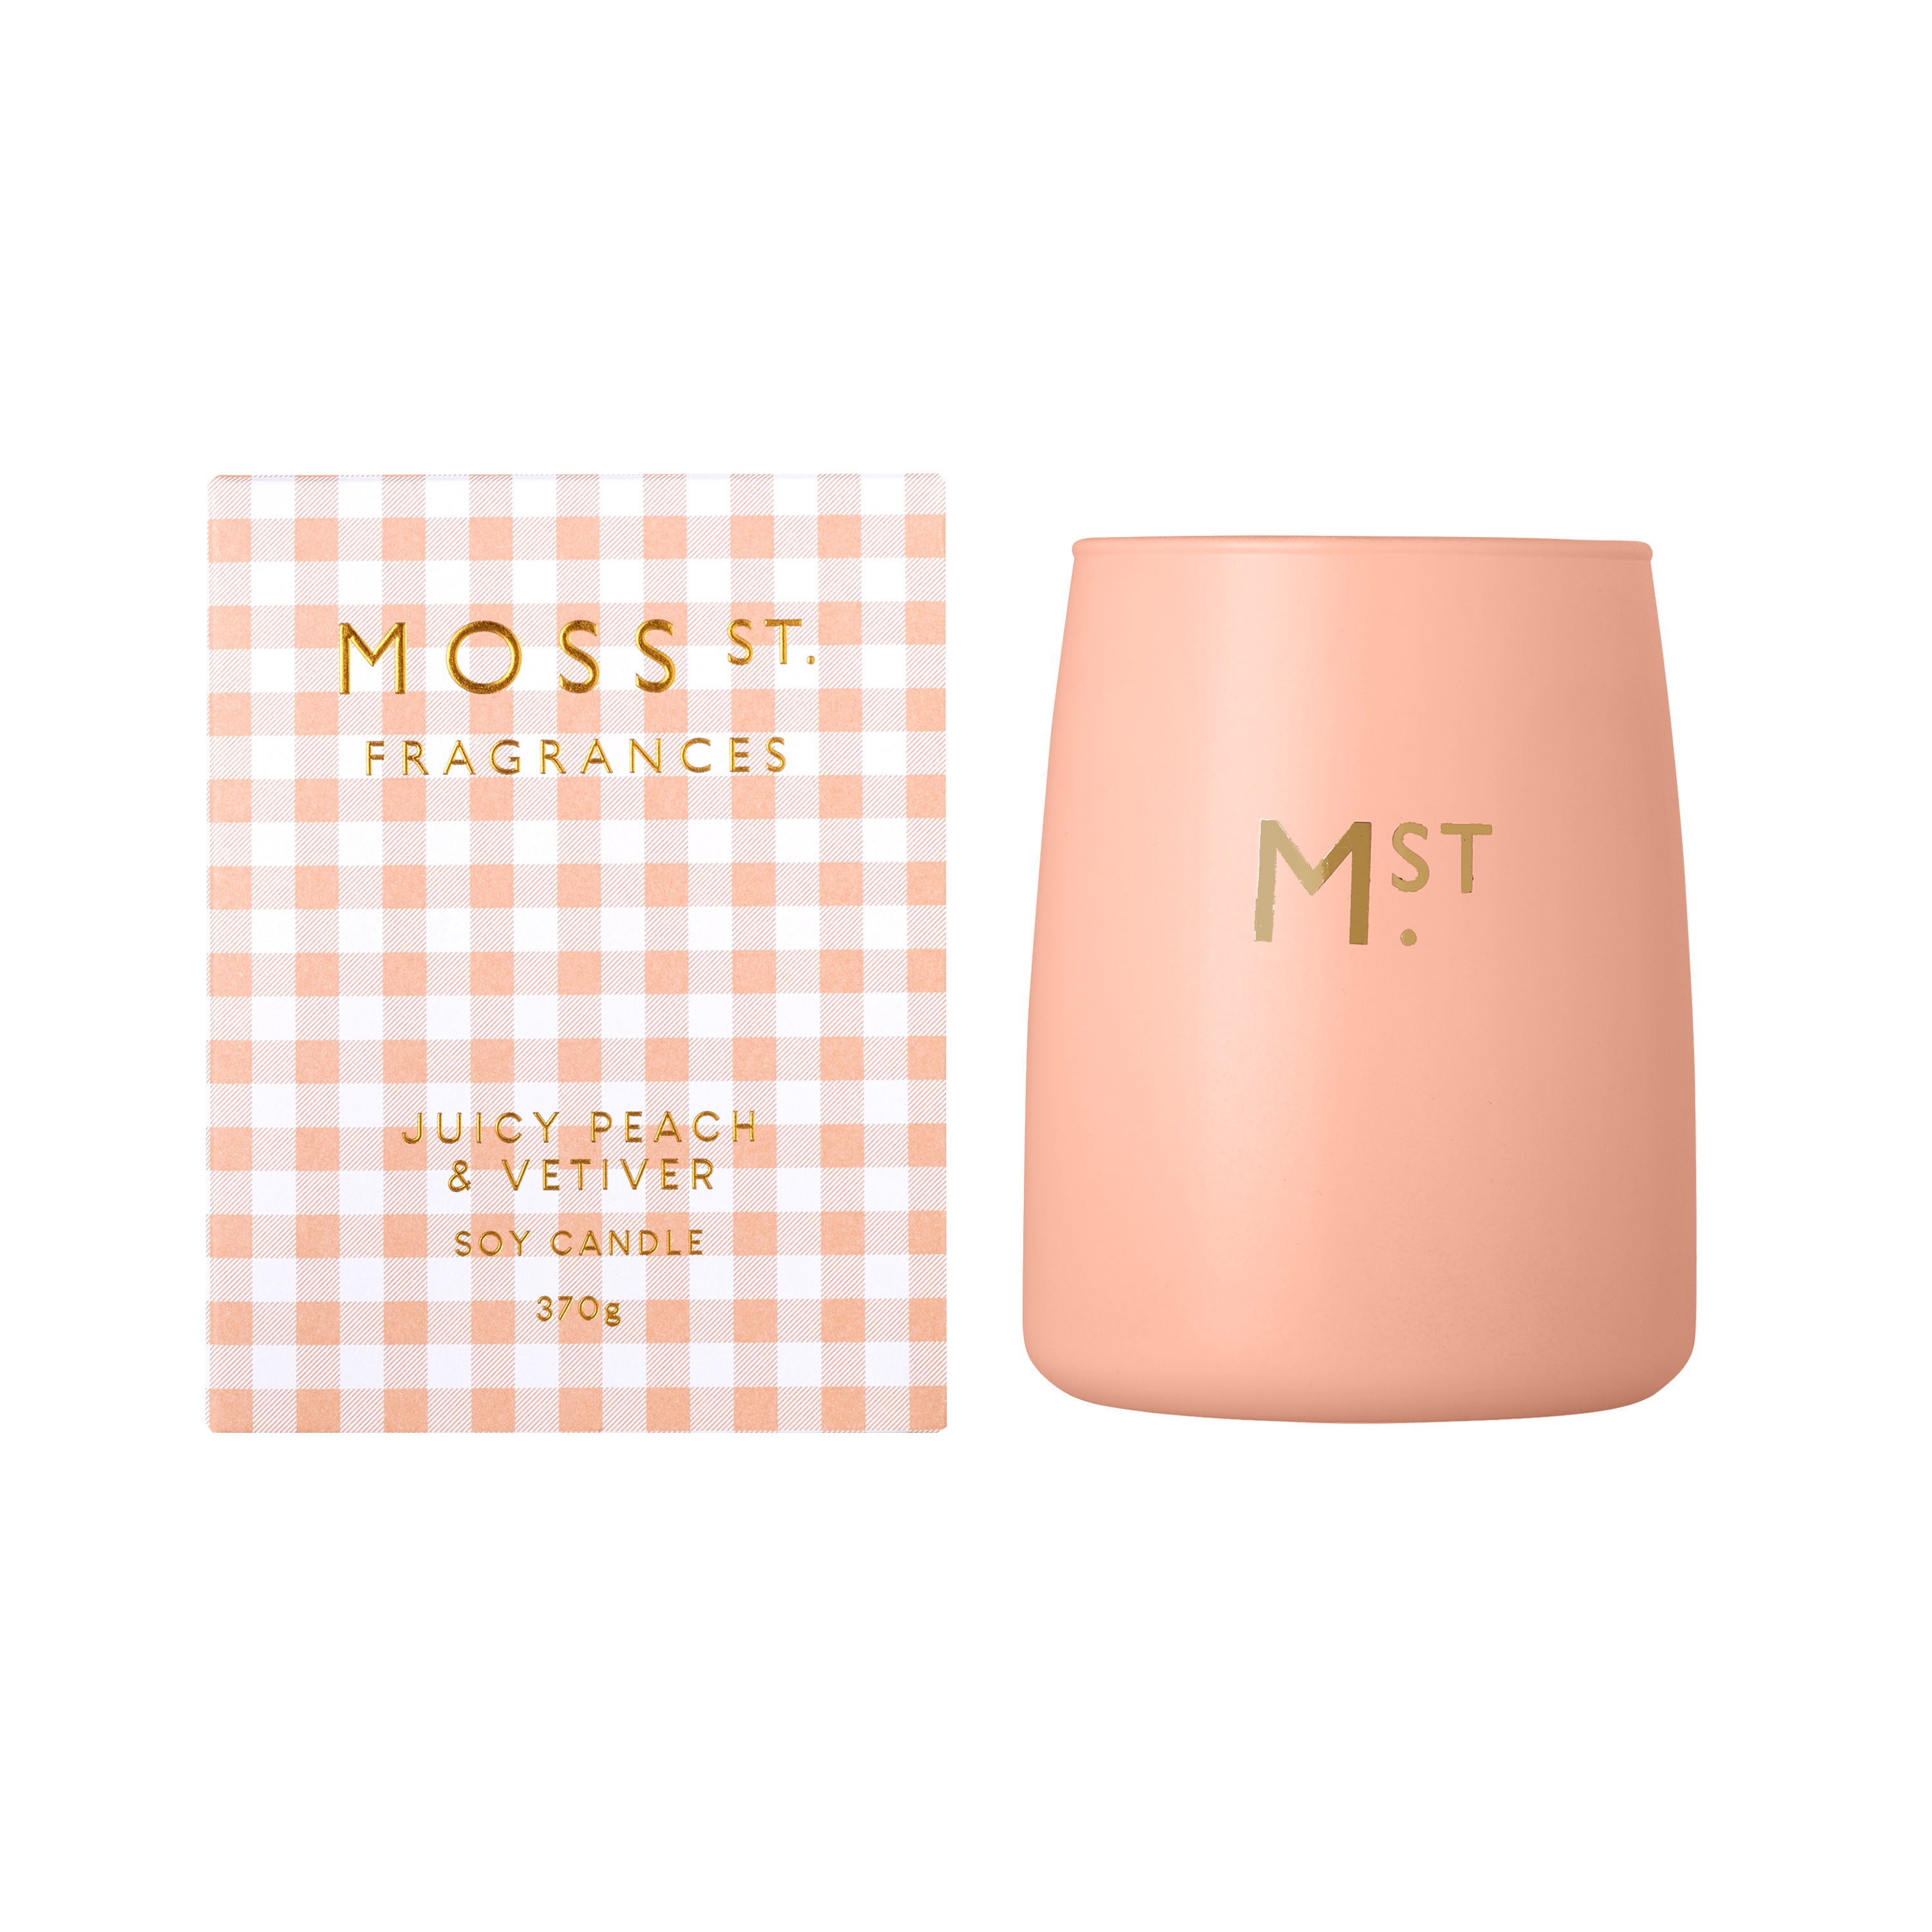 Moss St Juicy Peach & Vetiver Large Candle 370g (Limited Edition)